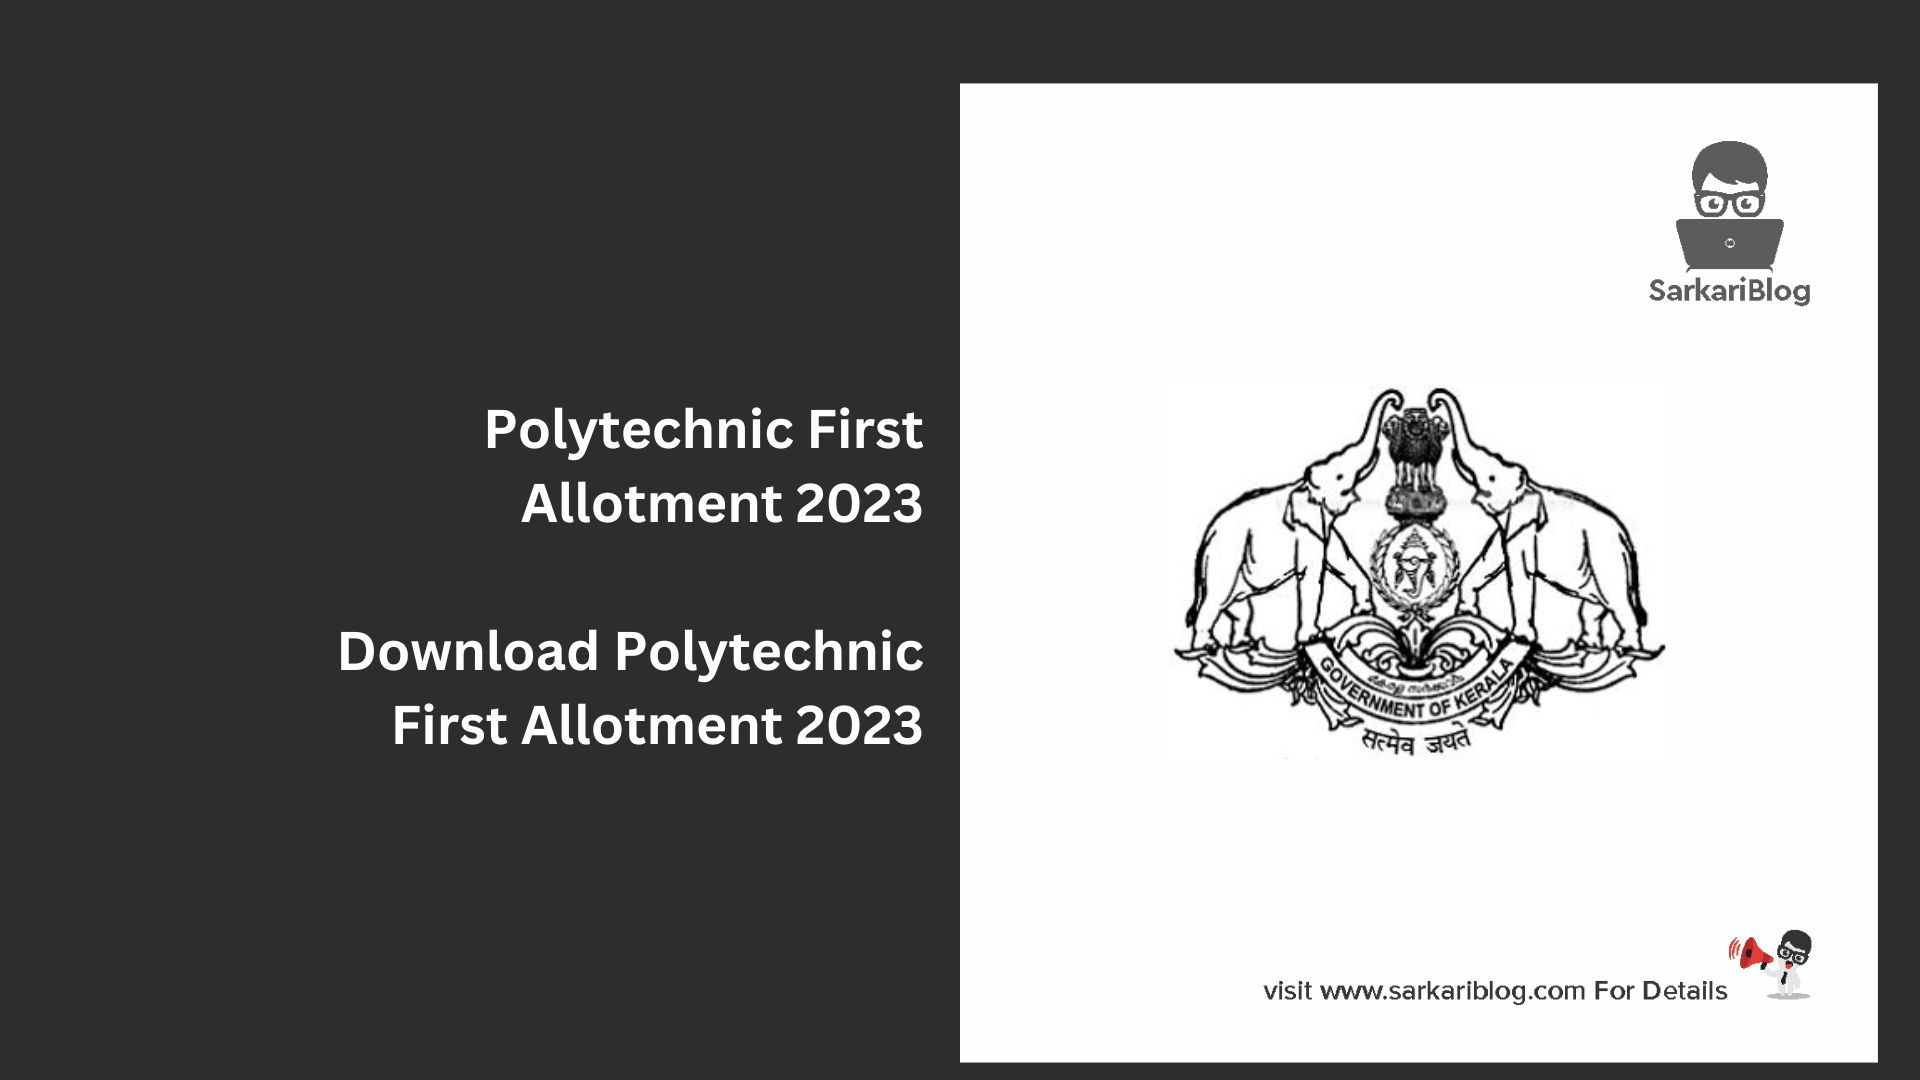 Polytechnic First Allotment 2023